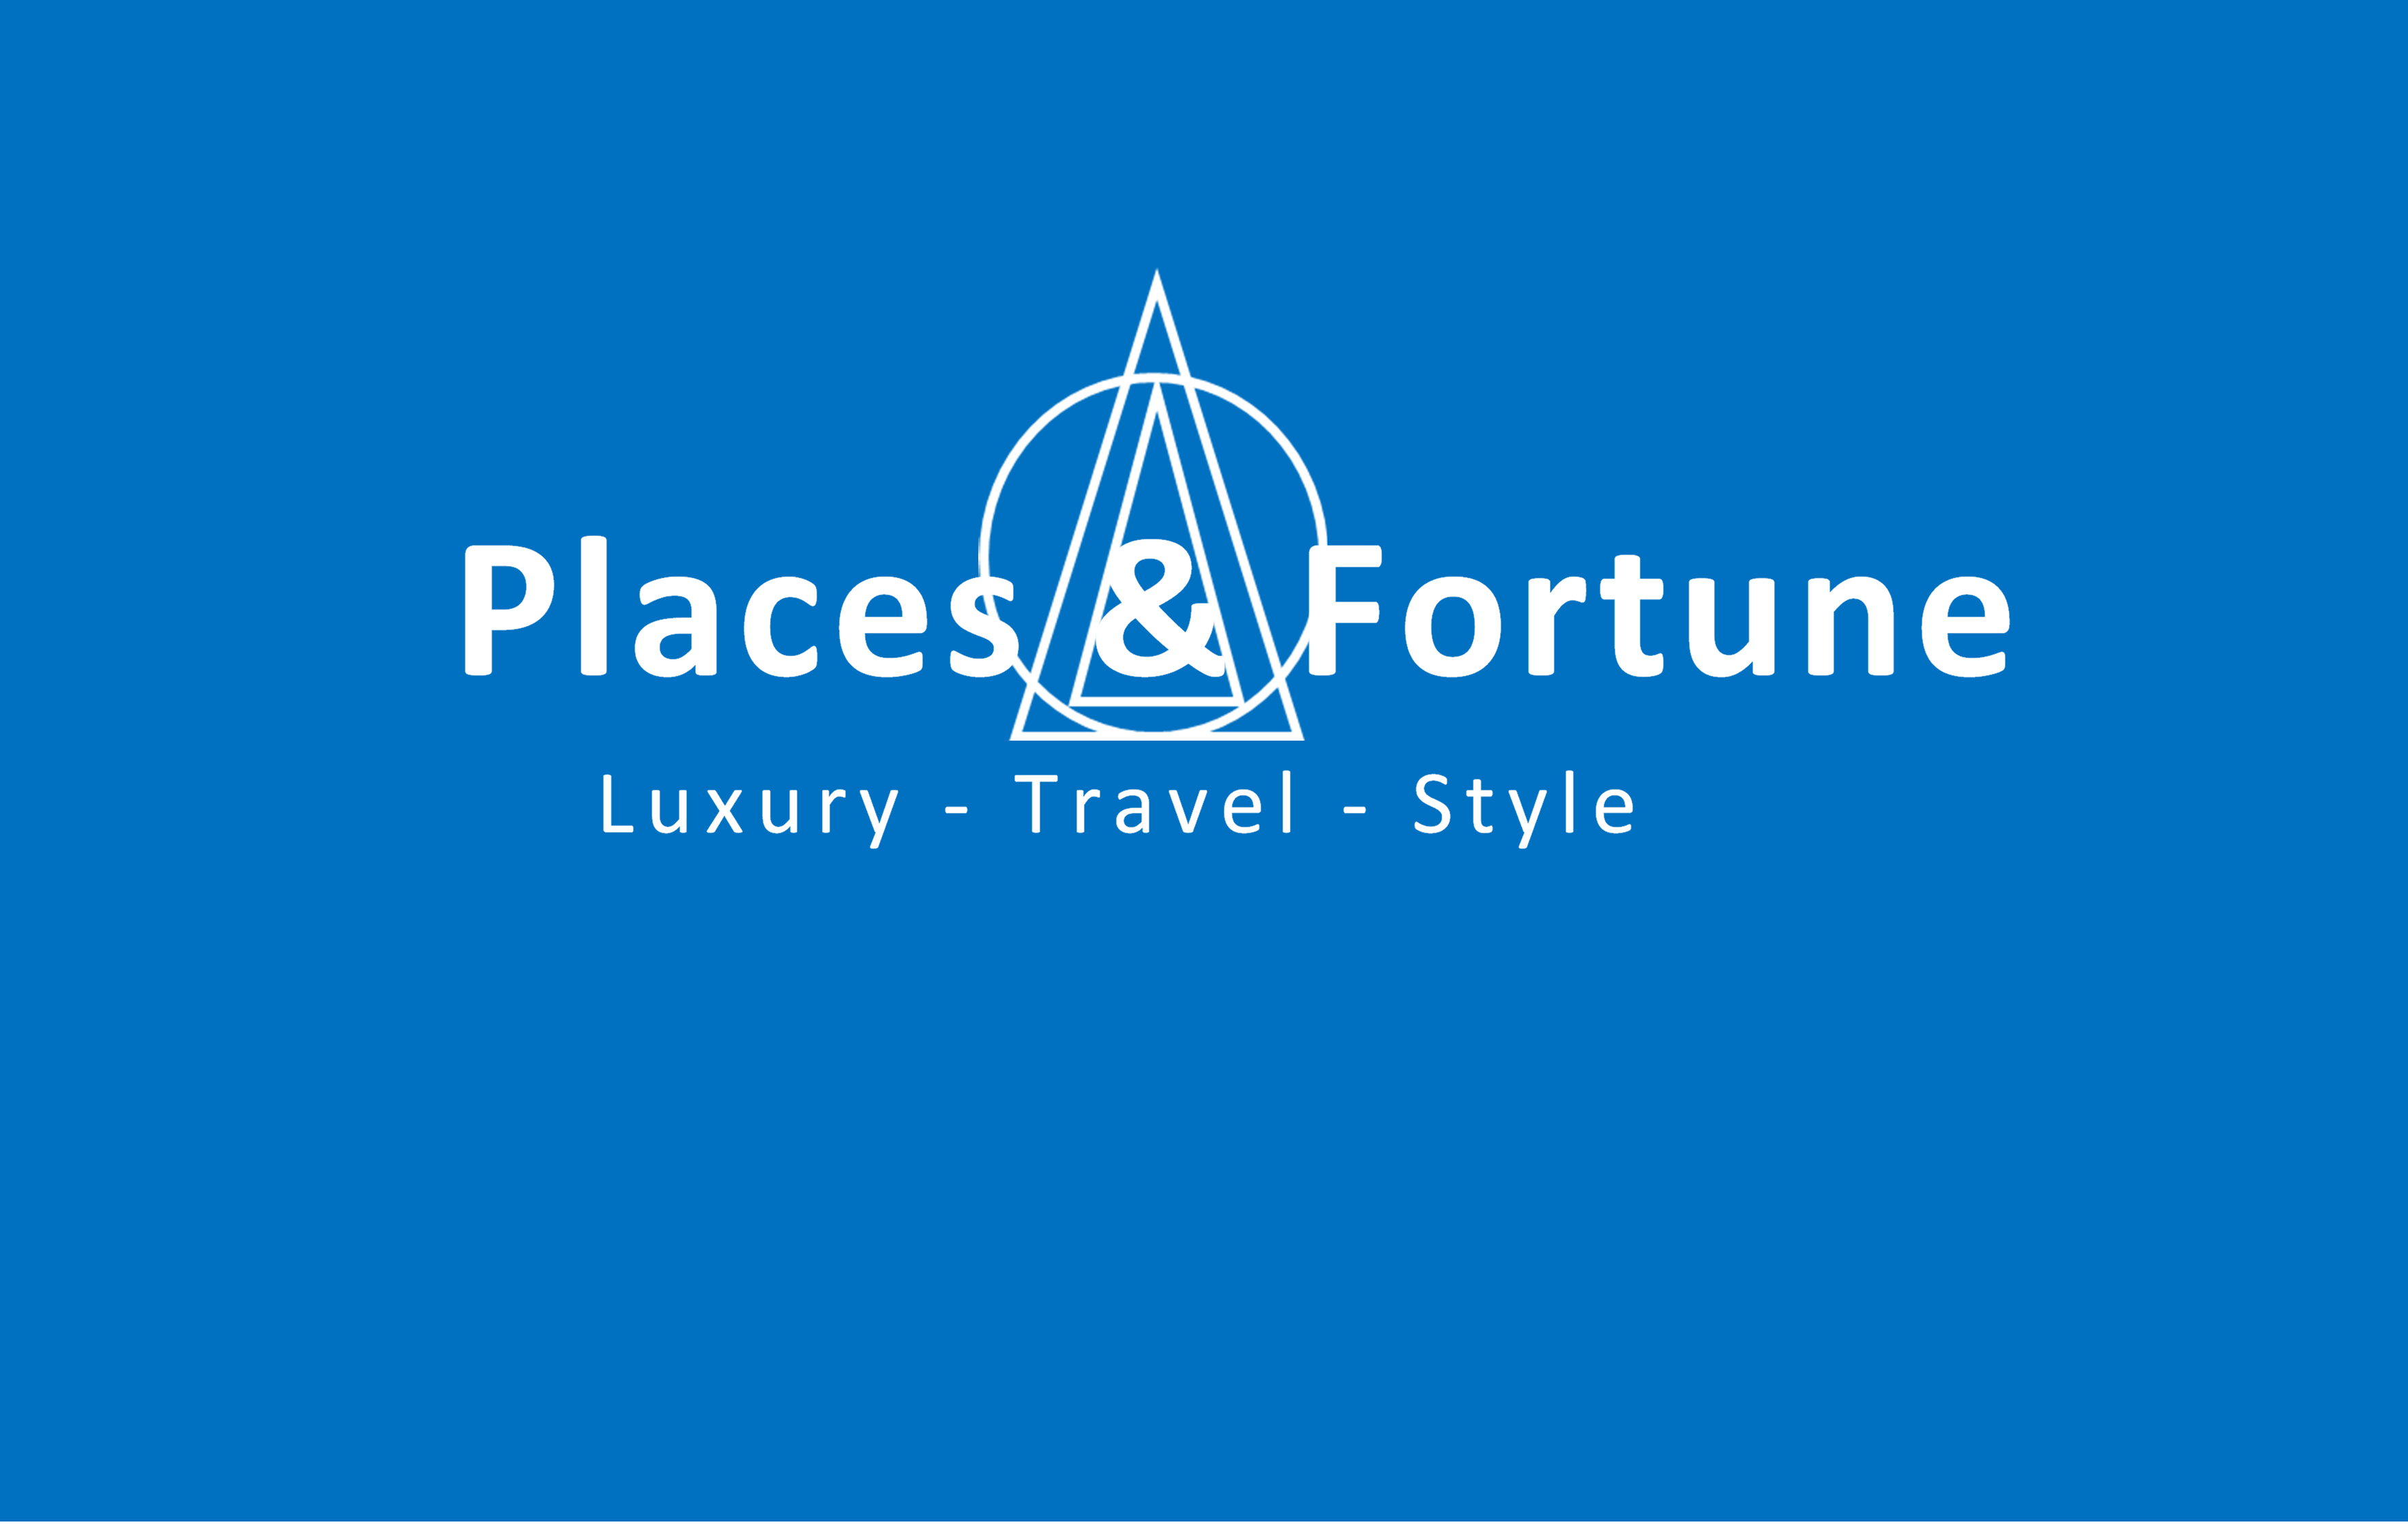 About Places & Fortune - Places & Fortune